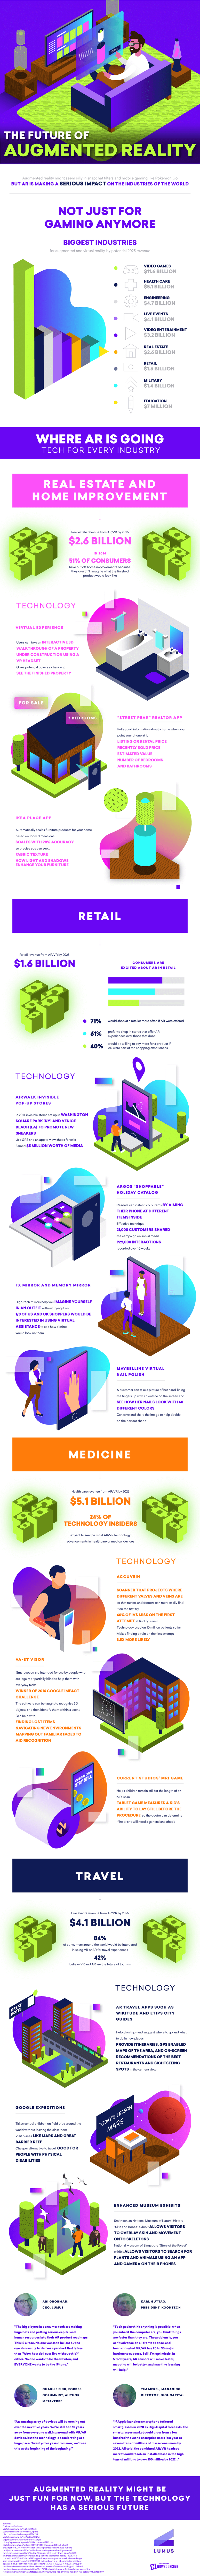 Augmented Reality Trends [Infographic]